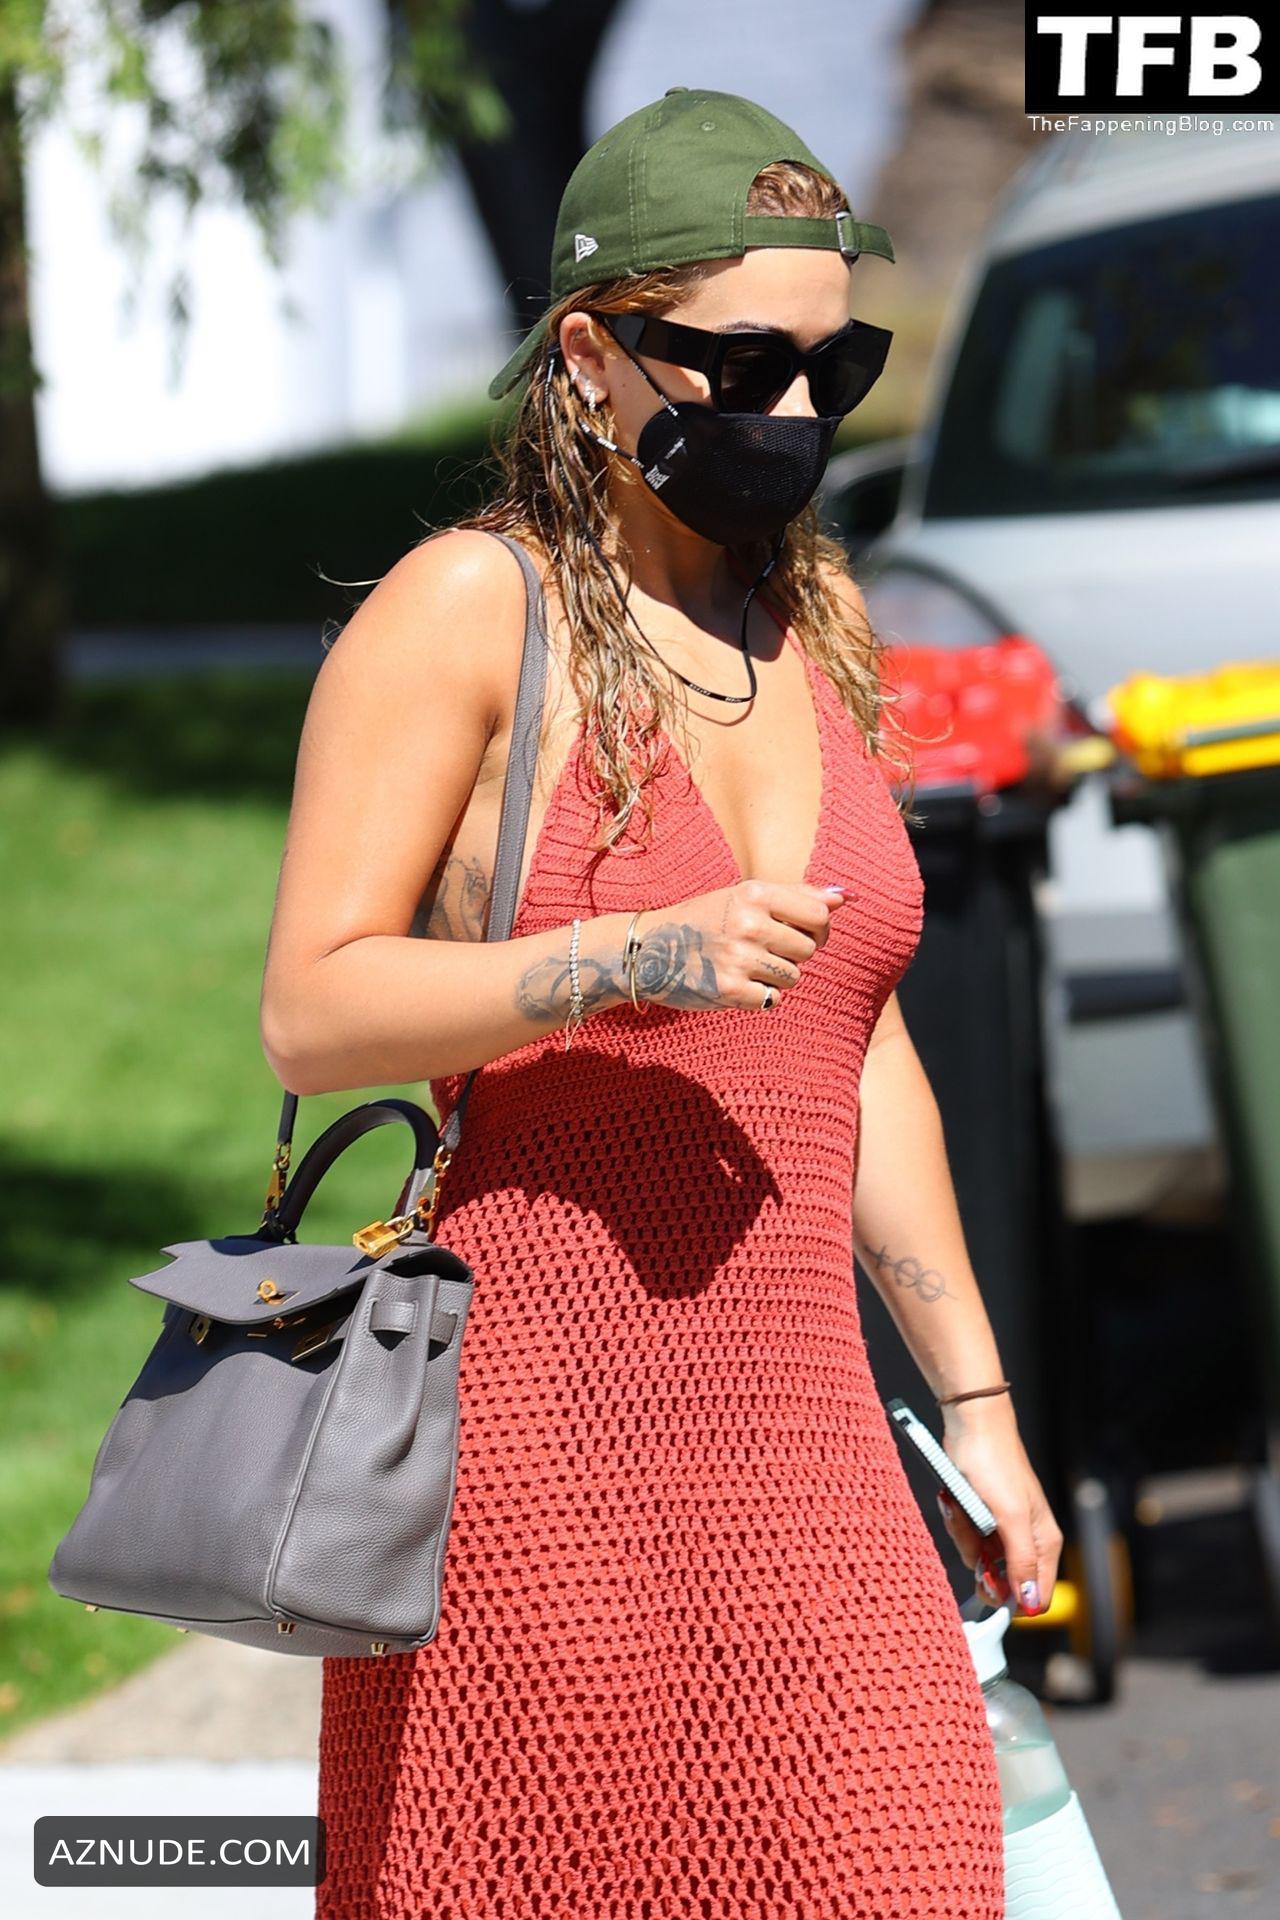 Rita Ora Wears An Nge Crochet Dress As She Gets Her Nails Done In Rose Bay Aznude